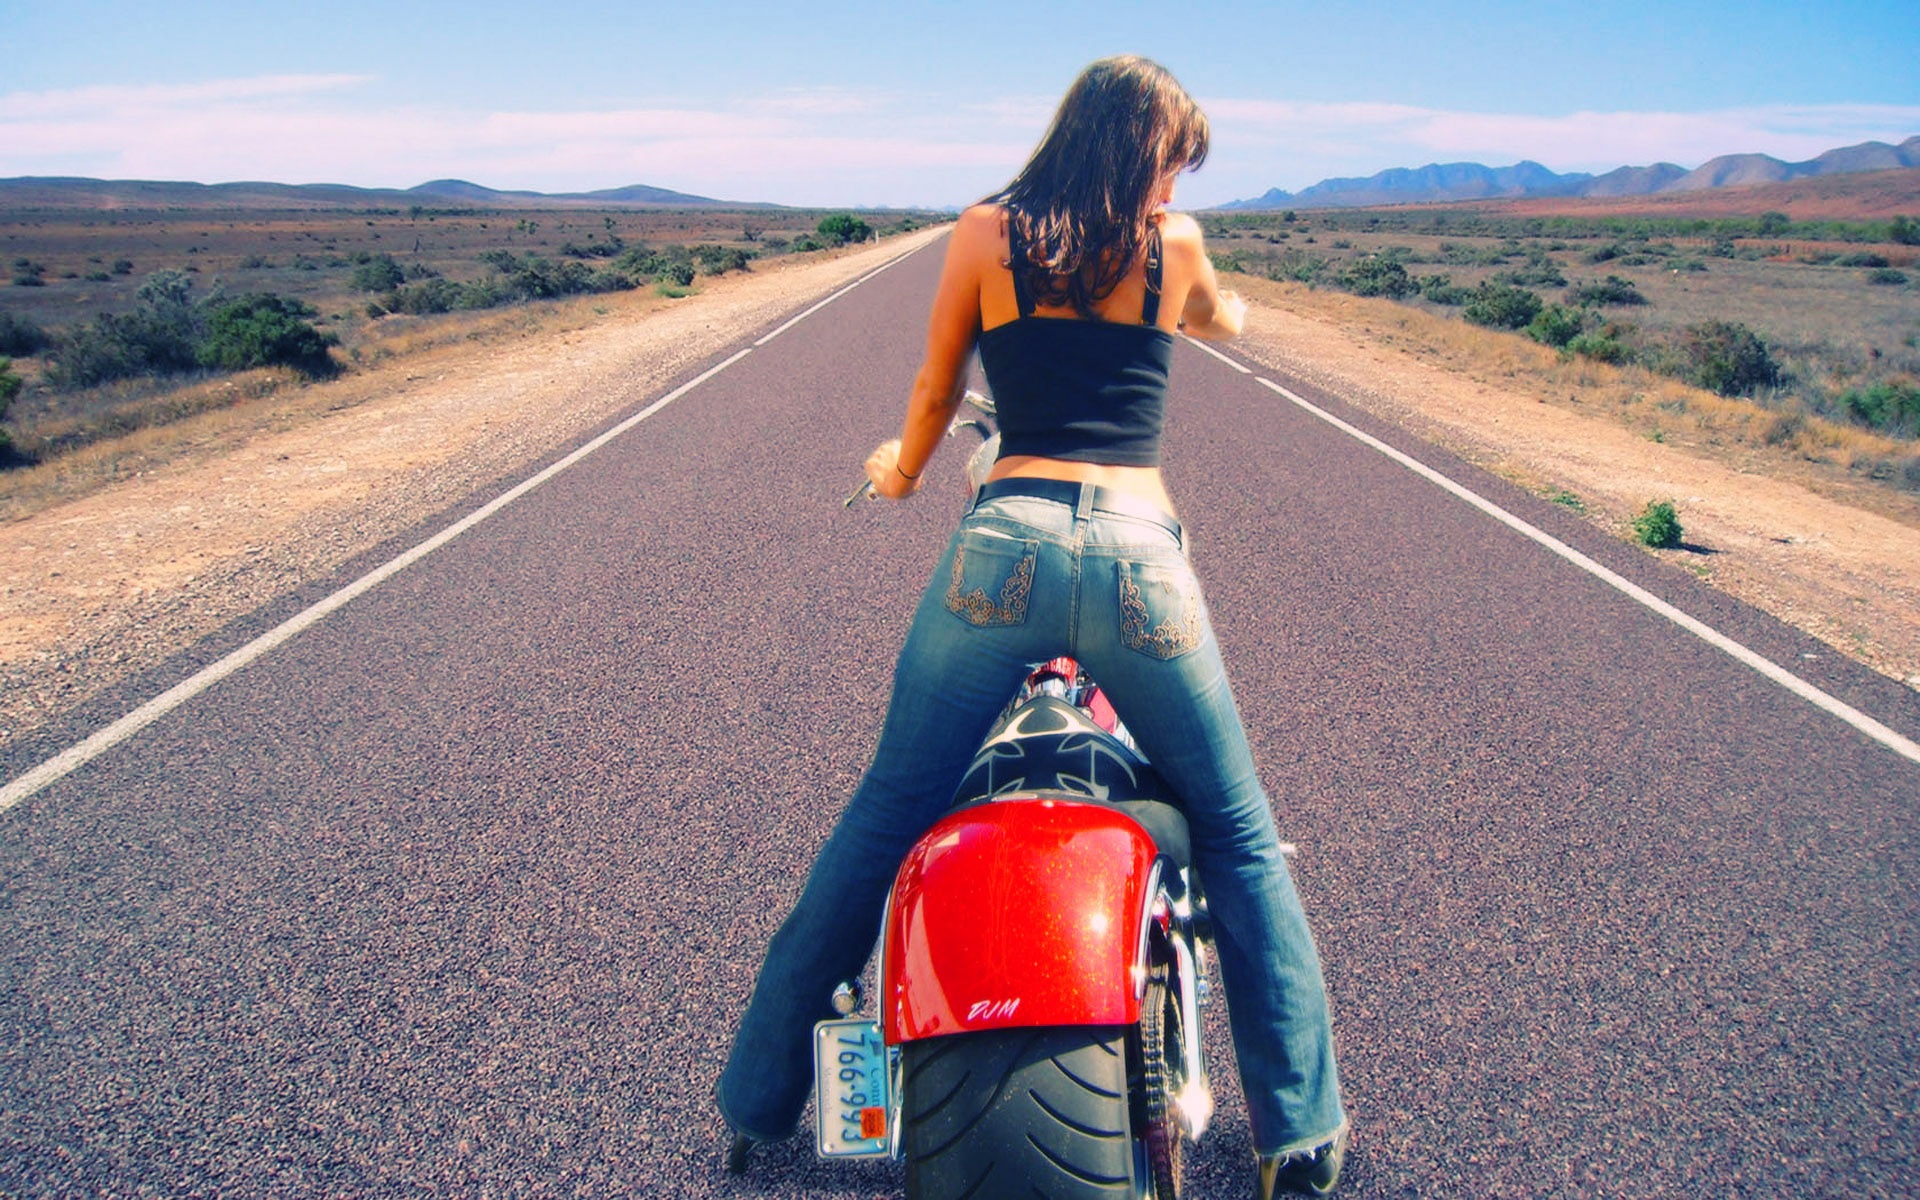 Girls On Motorcycles Pics Mainly But Ments Now Allowed